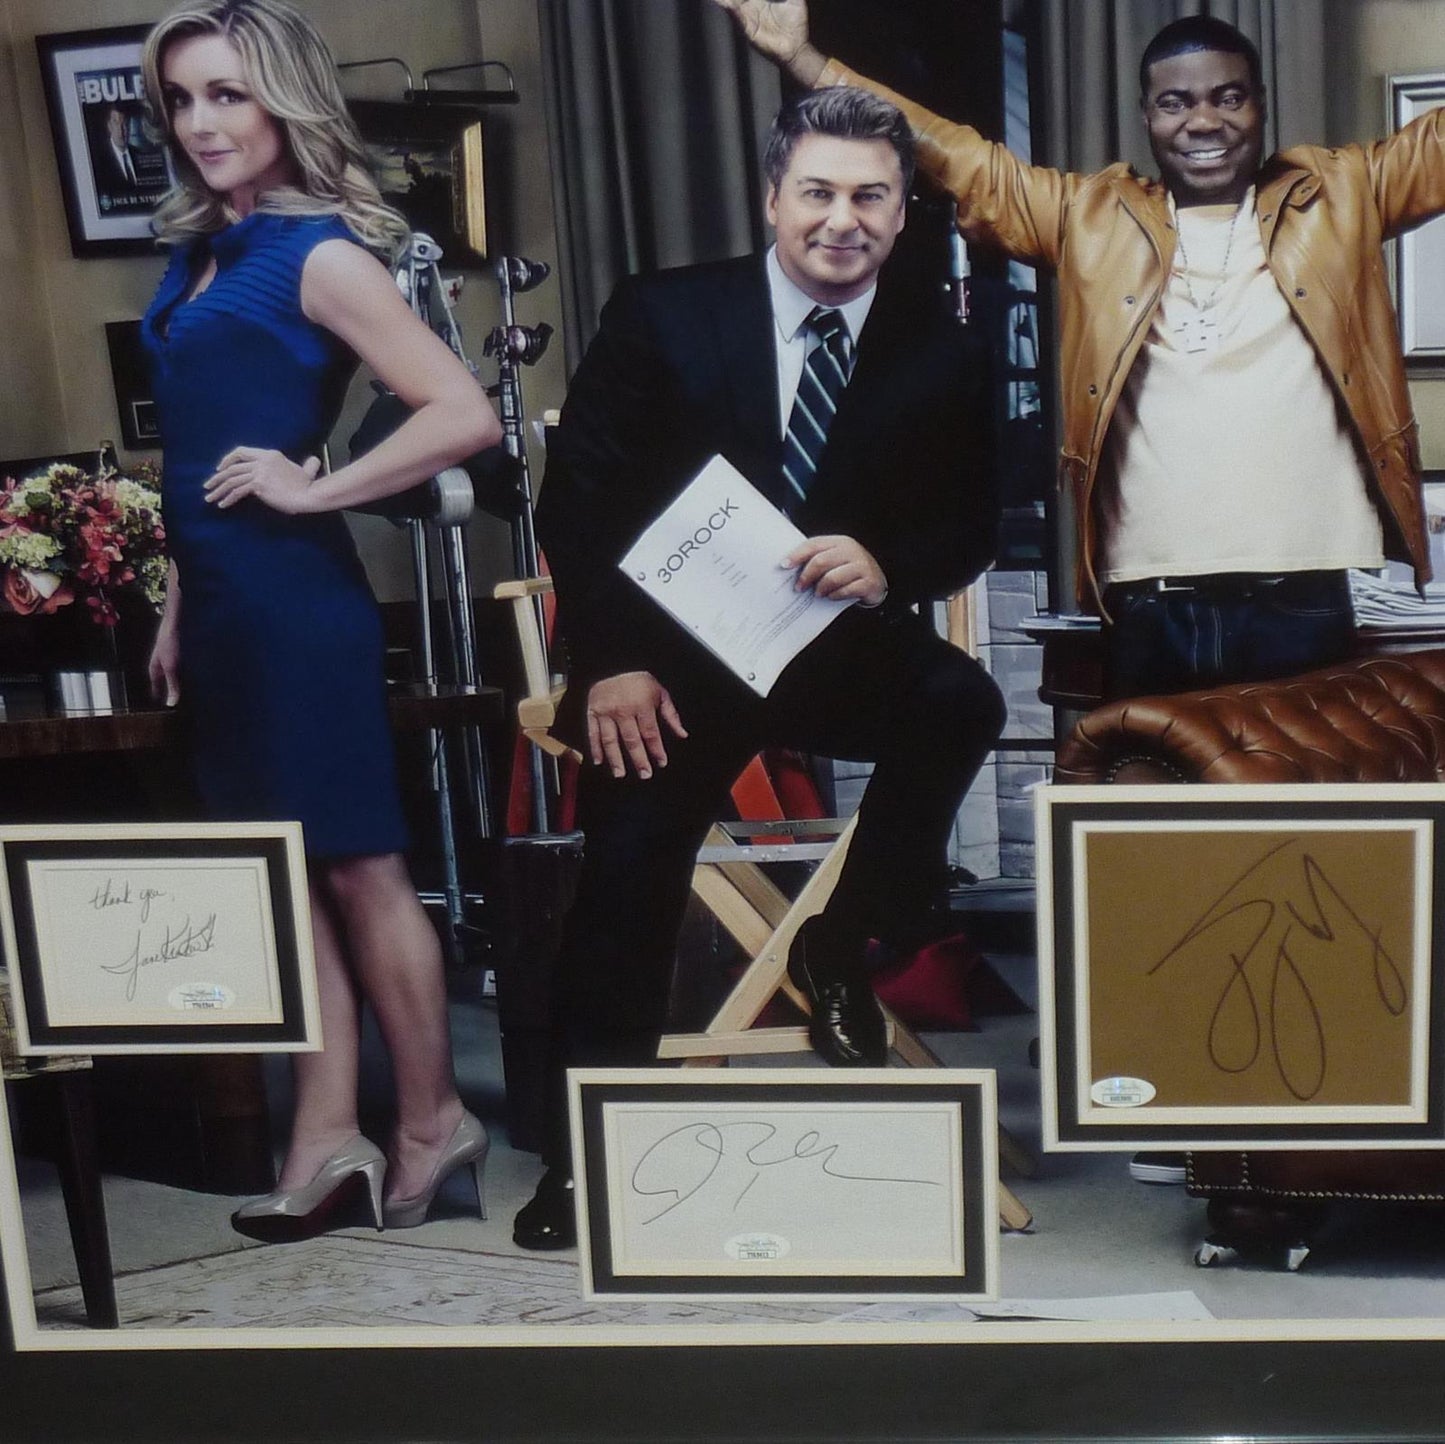 30 ROCK Full-Size TV Poster Deluxe Framed with All 5 Cast Autographs - JSA